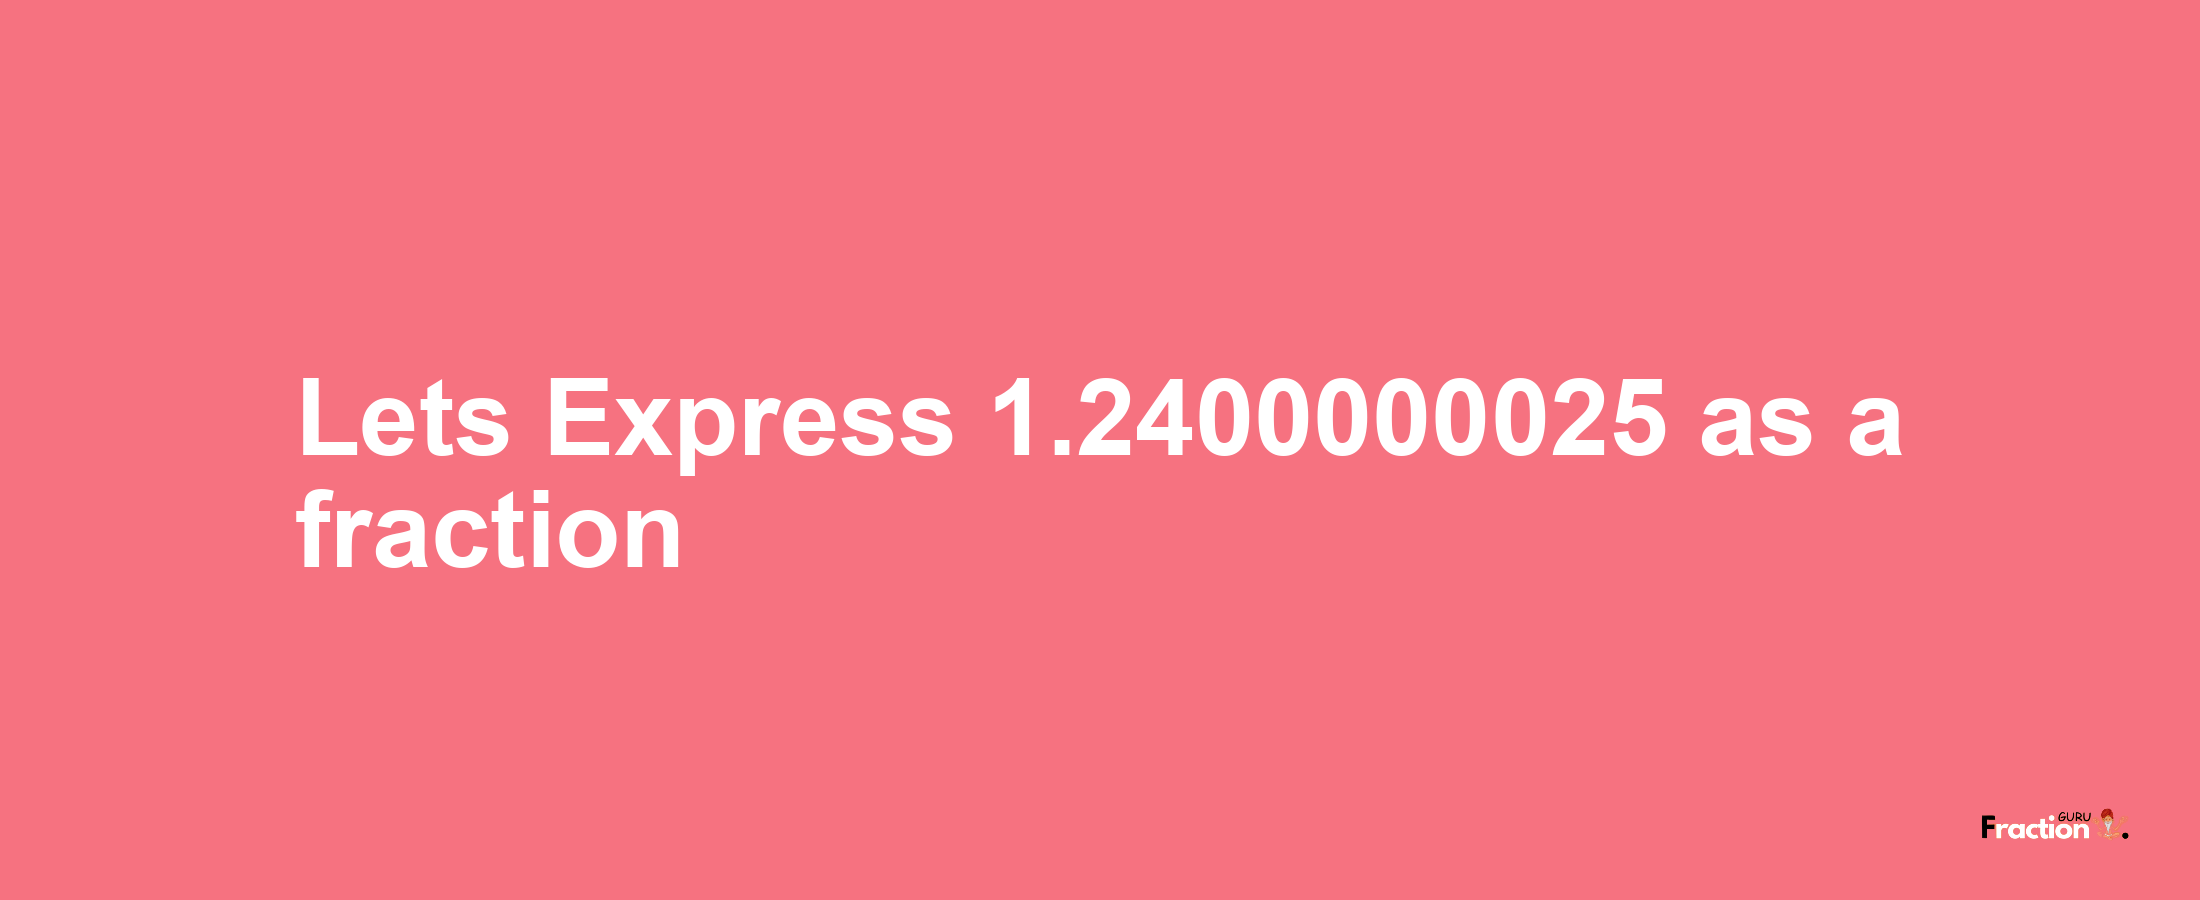 Lets Express 1.2400000025 as afraction